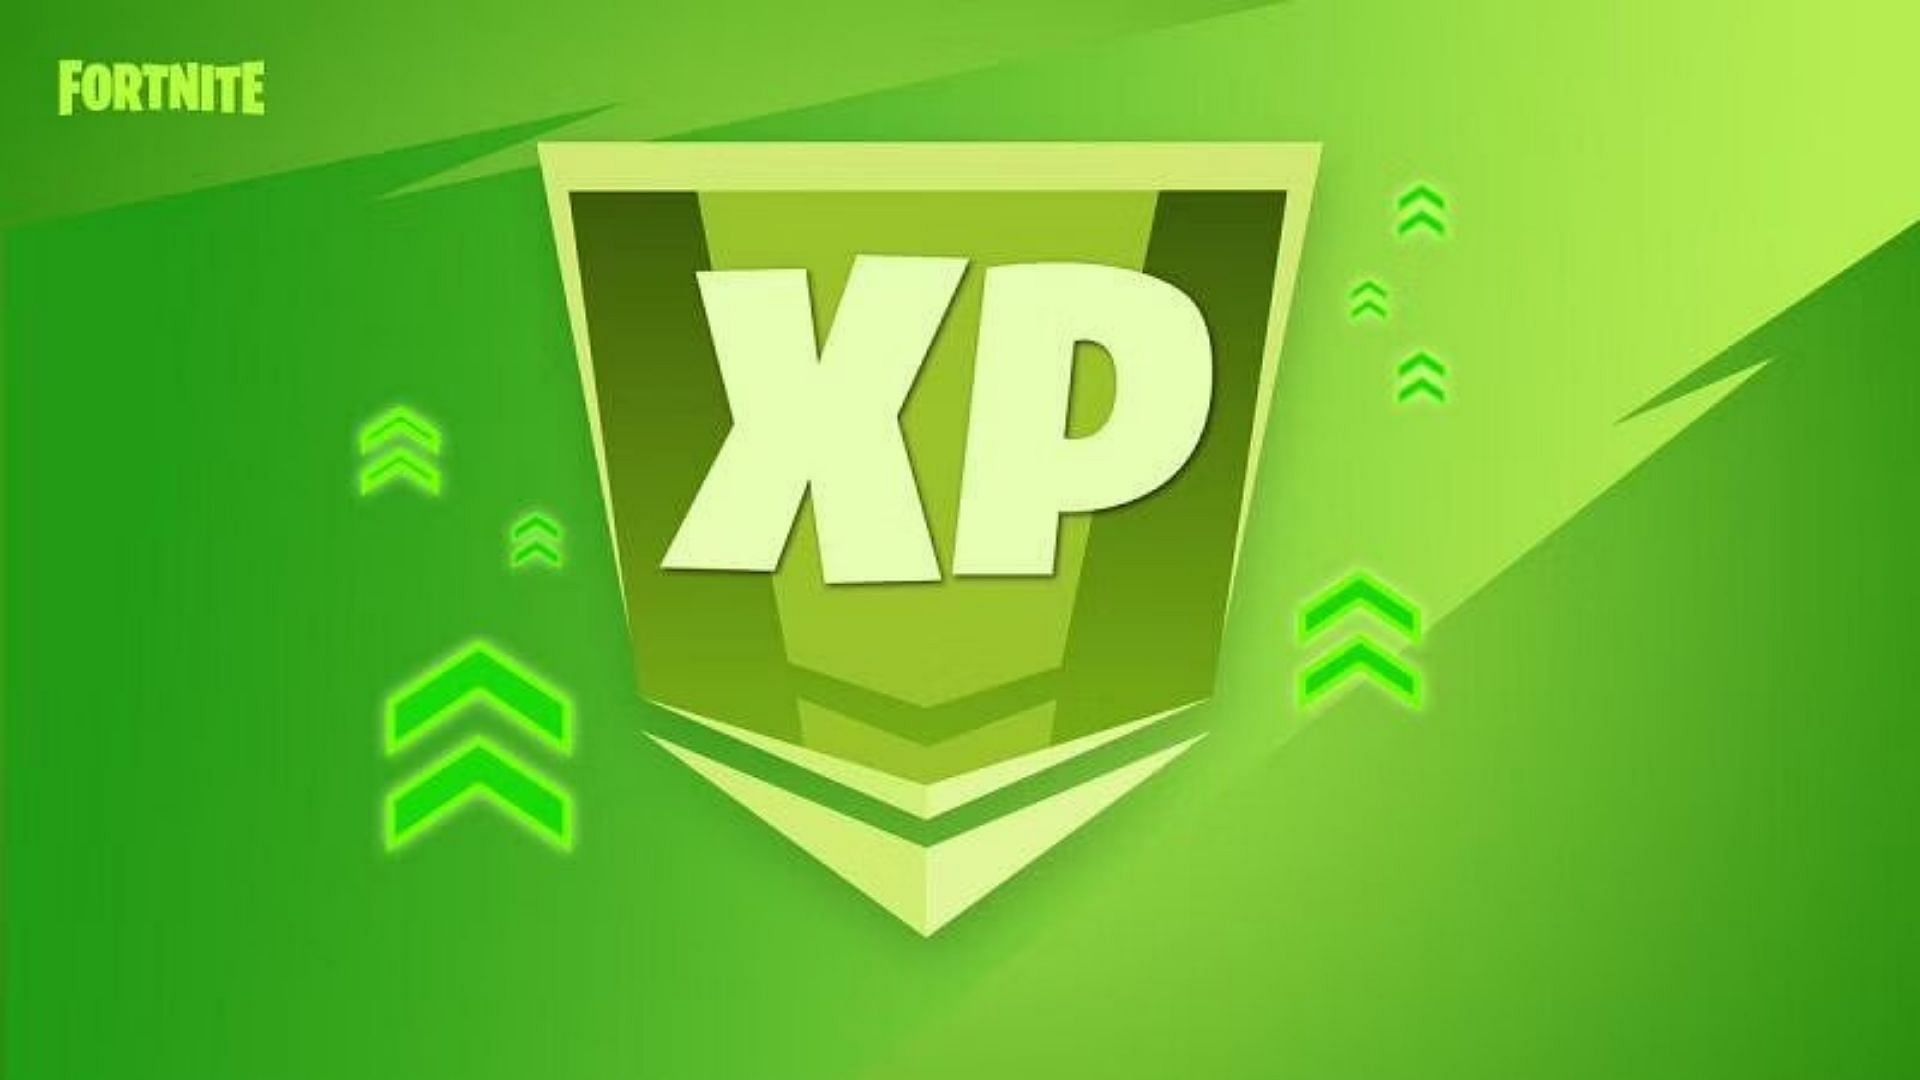 Players have been finding new ways to farm XP in the latest Fortnite chapter (Image via Sportskeeda)